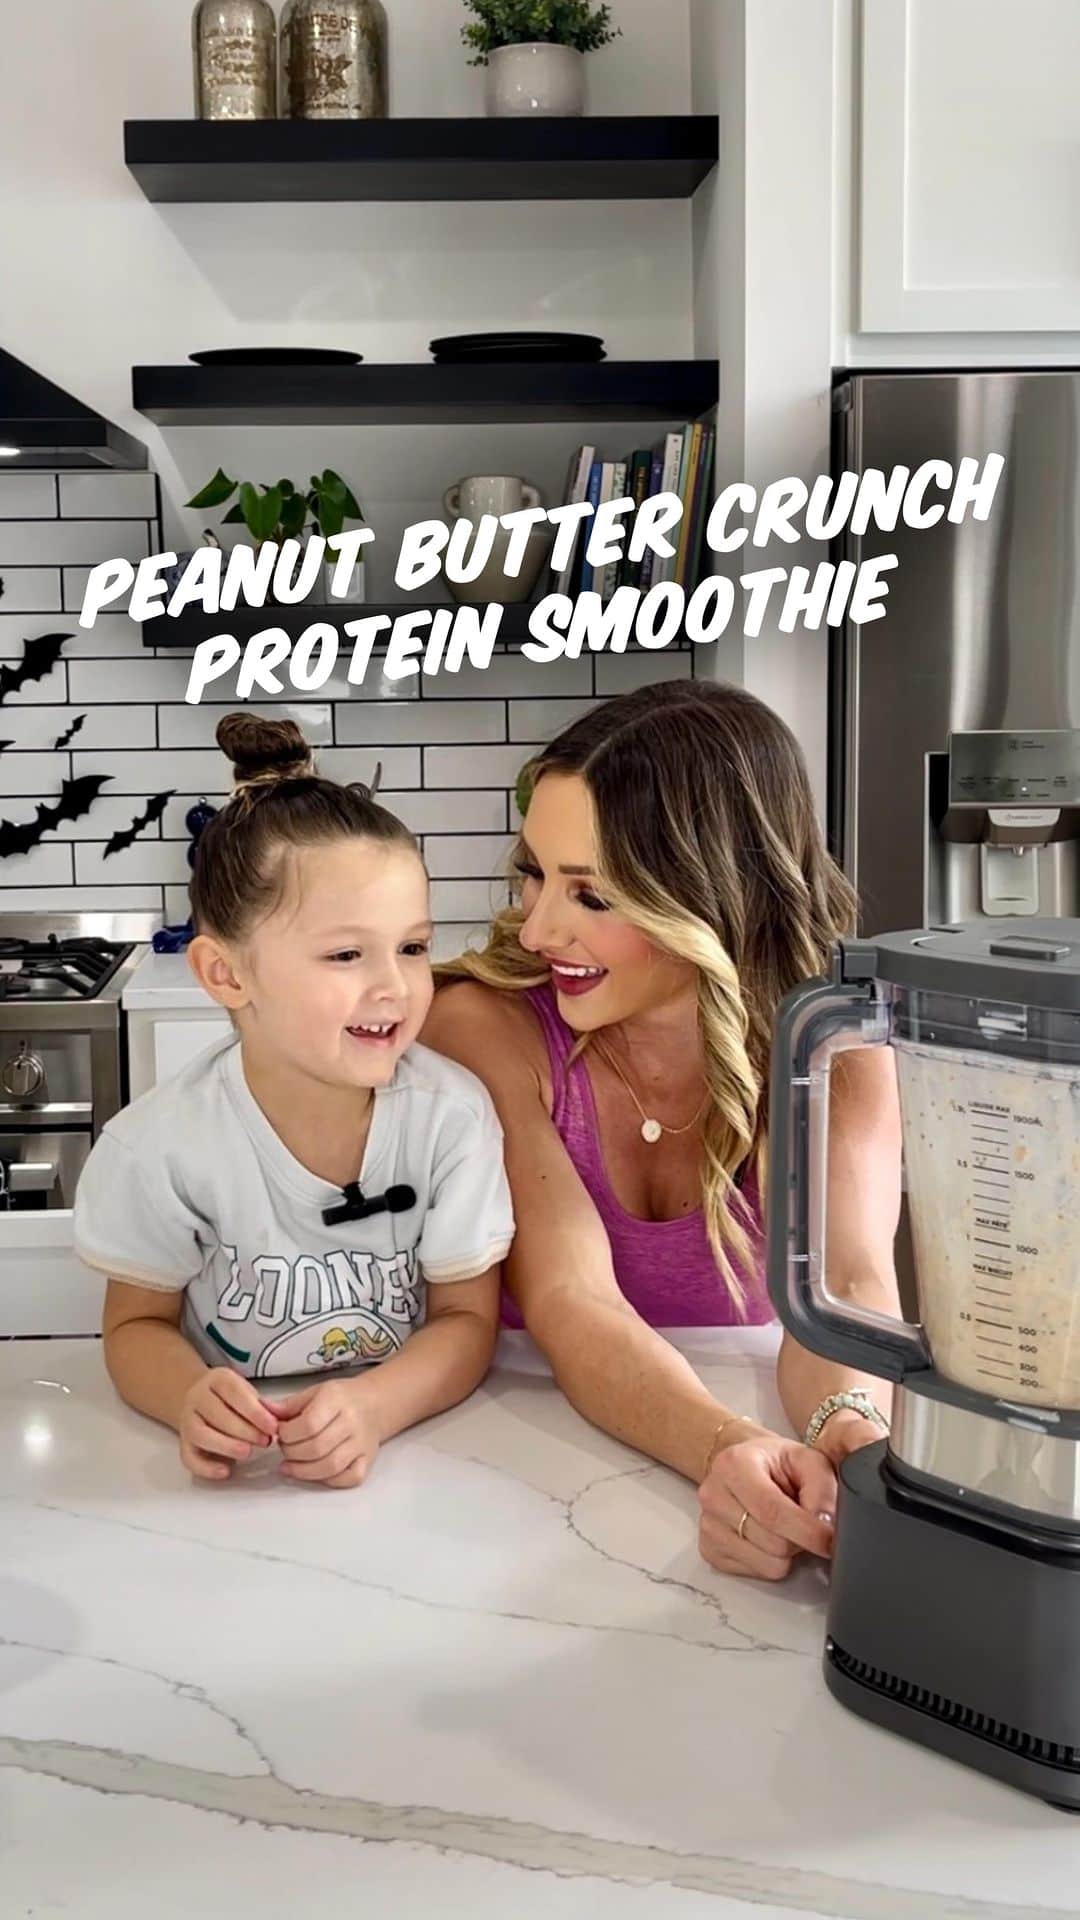 Paige Hathawayのインスタグラム：「Peanut Butter Crunch Protein Smoothie! This recipe is from my @fitin5coaching plan! 🤤 and only about 200 calories!!   SAVE THIS RECIPE & SHARE IT WITH A FRIEND!  INGREDIENTS: ➖ 1/2 of a BANANA *frozen preferred  ➖ 3/4 cup MILK *of choice ➖ 1 tsp PEANUT BUTTER  ➖ 3/4 tsp CHIA SEEDS ➖ 3/4 scoop @livbody PROTEIN *of choice ➖ 1 tbsp rolled OATS ➖ 1/4 tsp CINNAMON ➖ 1/2 cup ICE   INSTRUCTIONS: Add all ingredients to blender and blend!  Are you finding it challenging to achieve your fitness goals despite your efforts? It could be related to your dietary choices. Let me assist you by creating a tailored plan that fits your lifestyle while helping you reach your goals.. I can help you make it SO EASY. Click the link in my bio for more information! ℹ️ @fitin5coaching   Protein Powderr: @livbody *code: PAIGE for 20% off  Presley’s Silicone cup: @pkandcrew My Pink Outfit: @buffbunny_collection   #healthyfood #protein #smoothie #macros #familytime #recipe #instagram」